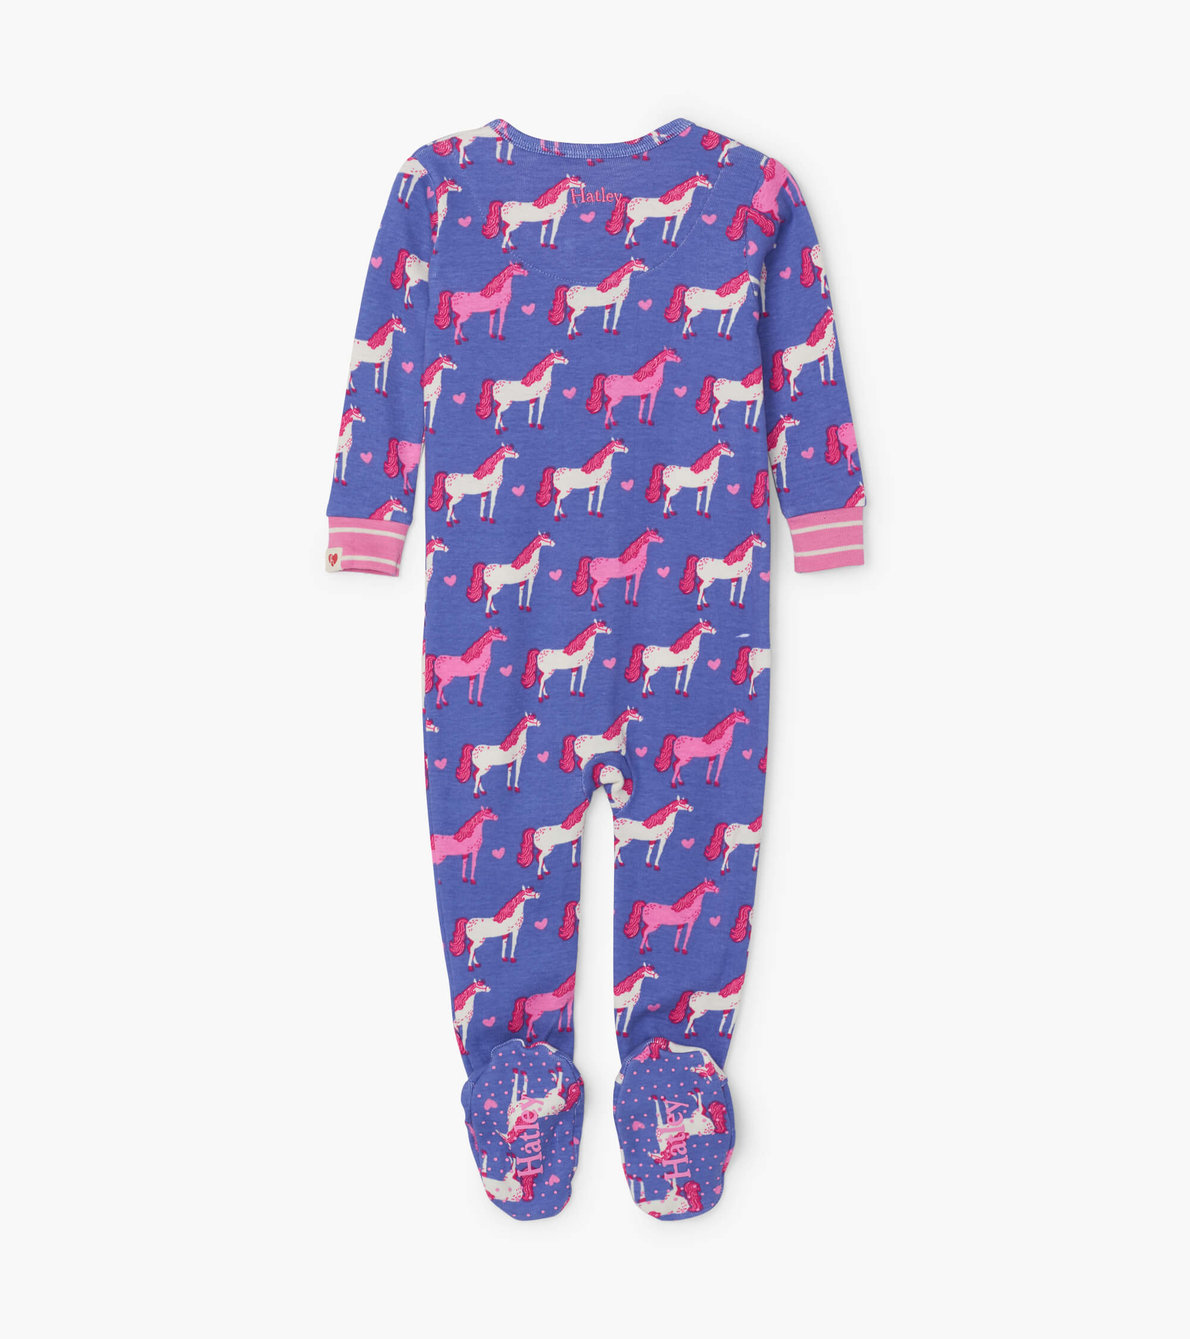 View larger image of Hearts and Horses Organic Cotton Footed Coverall